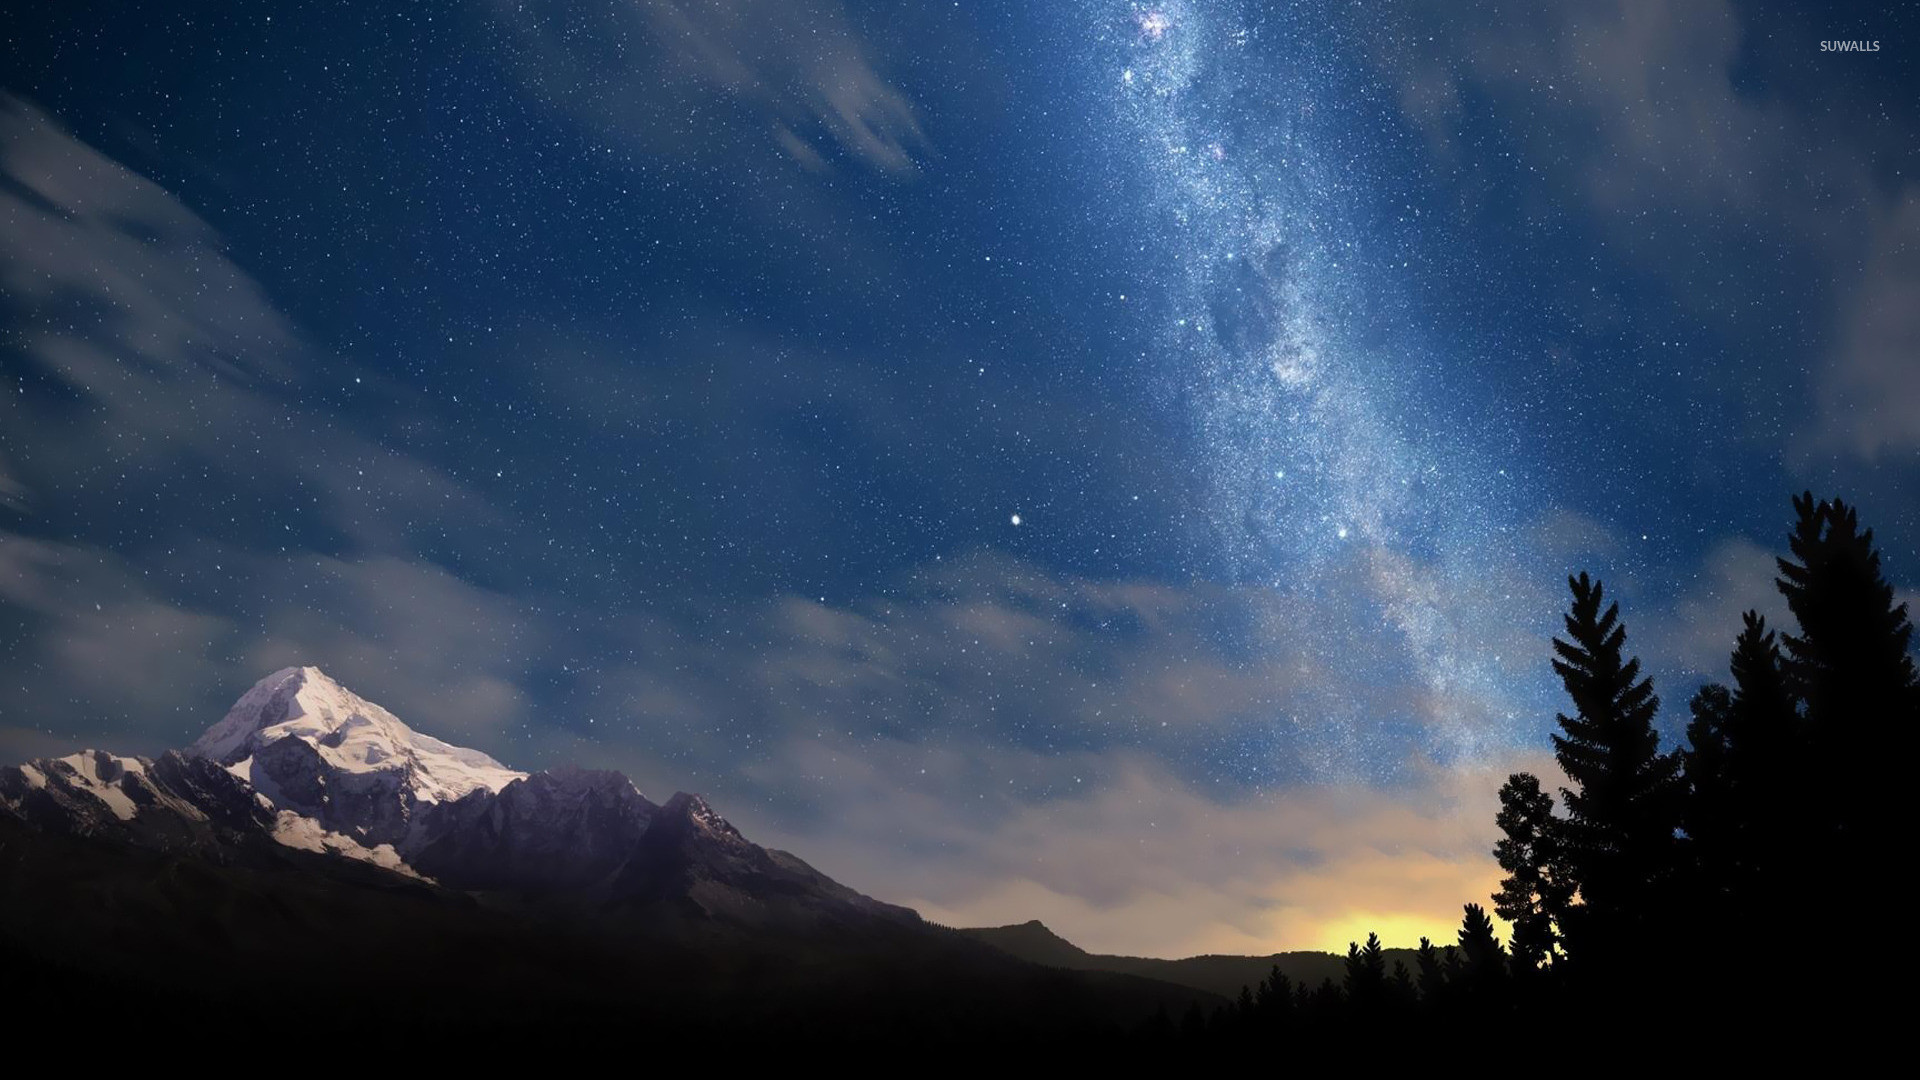 1920x1080 Starry night sky wallpaper - Nature wallpapers - #14836